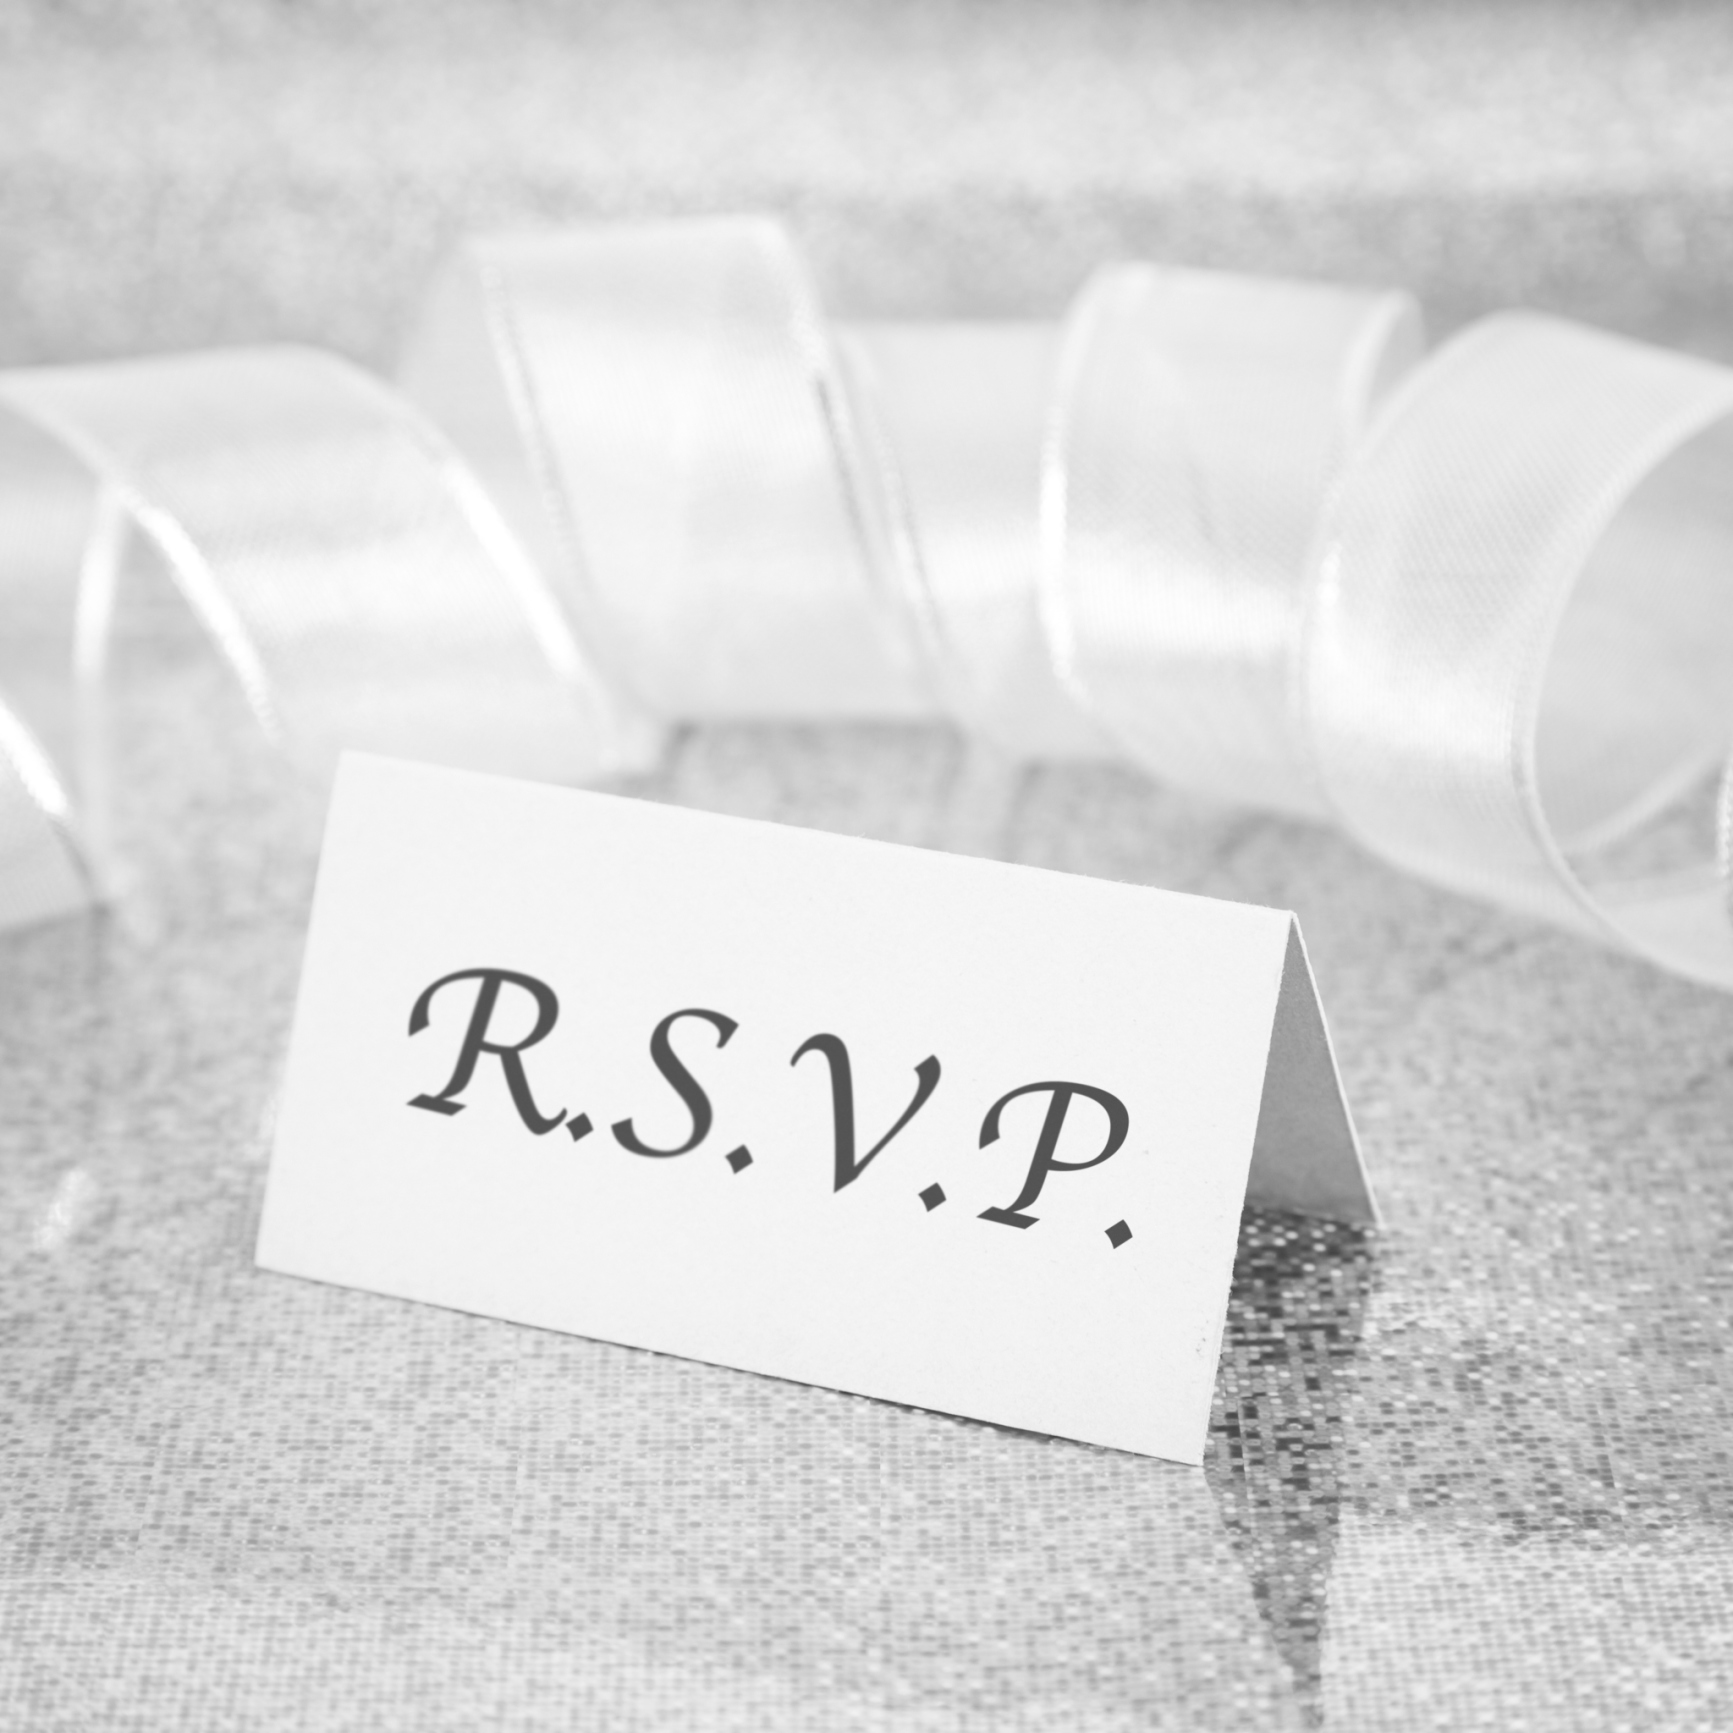 Why won't guests rsvp to my invitations?